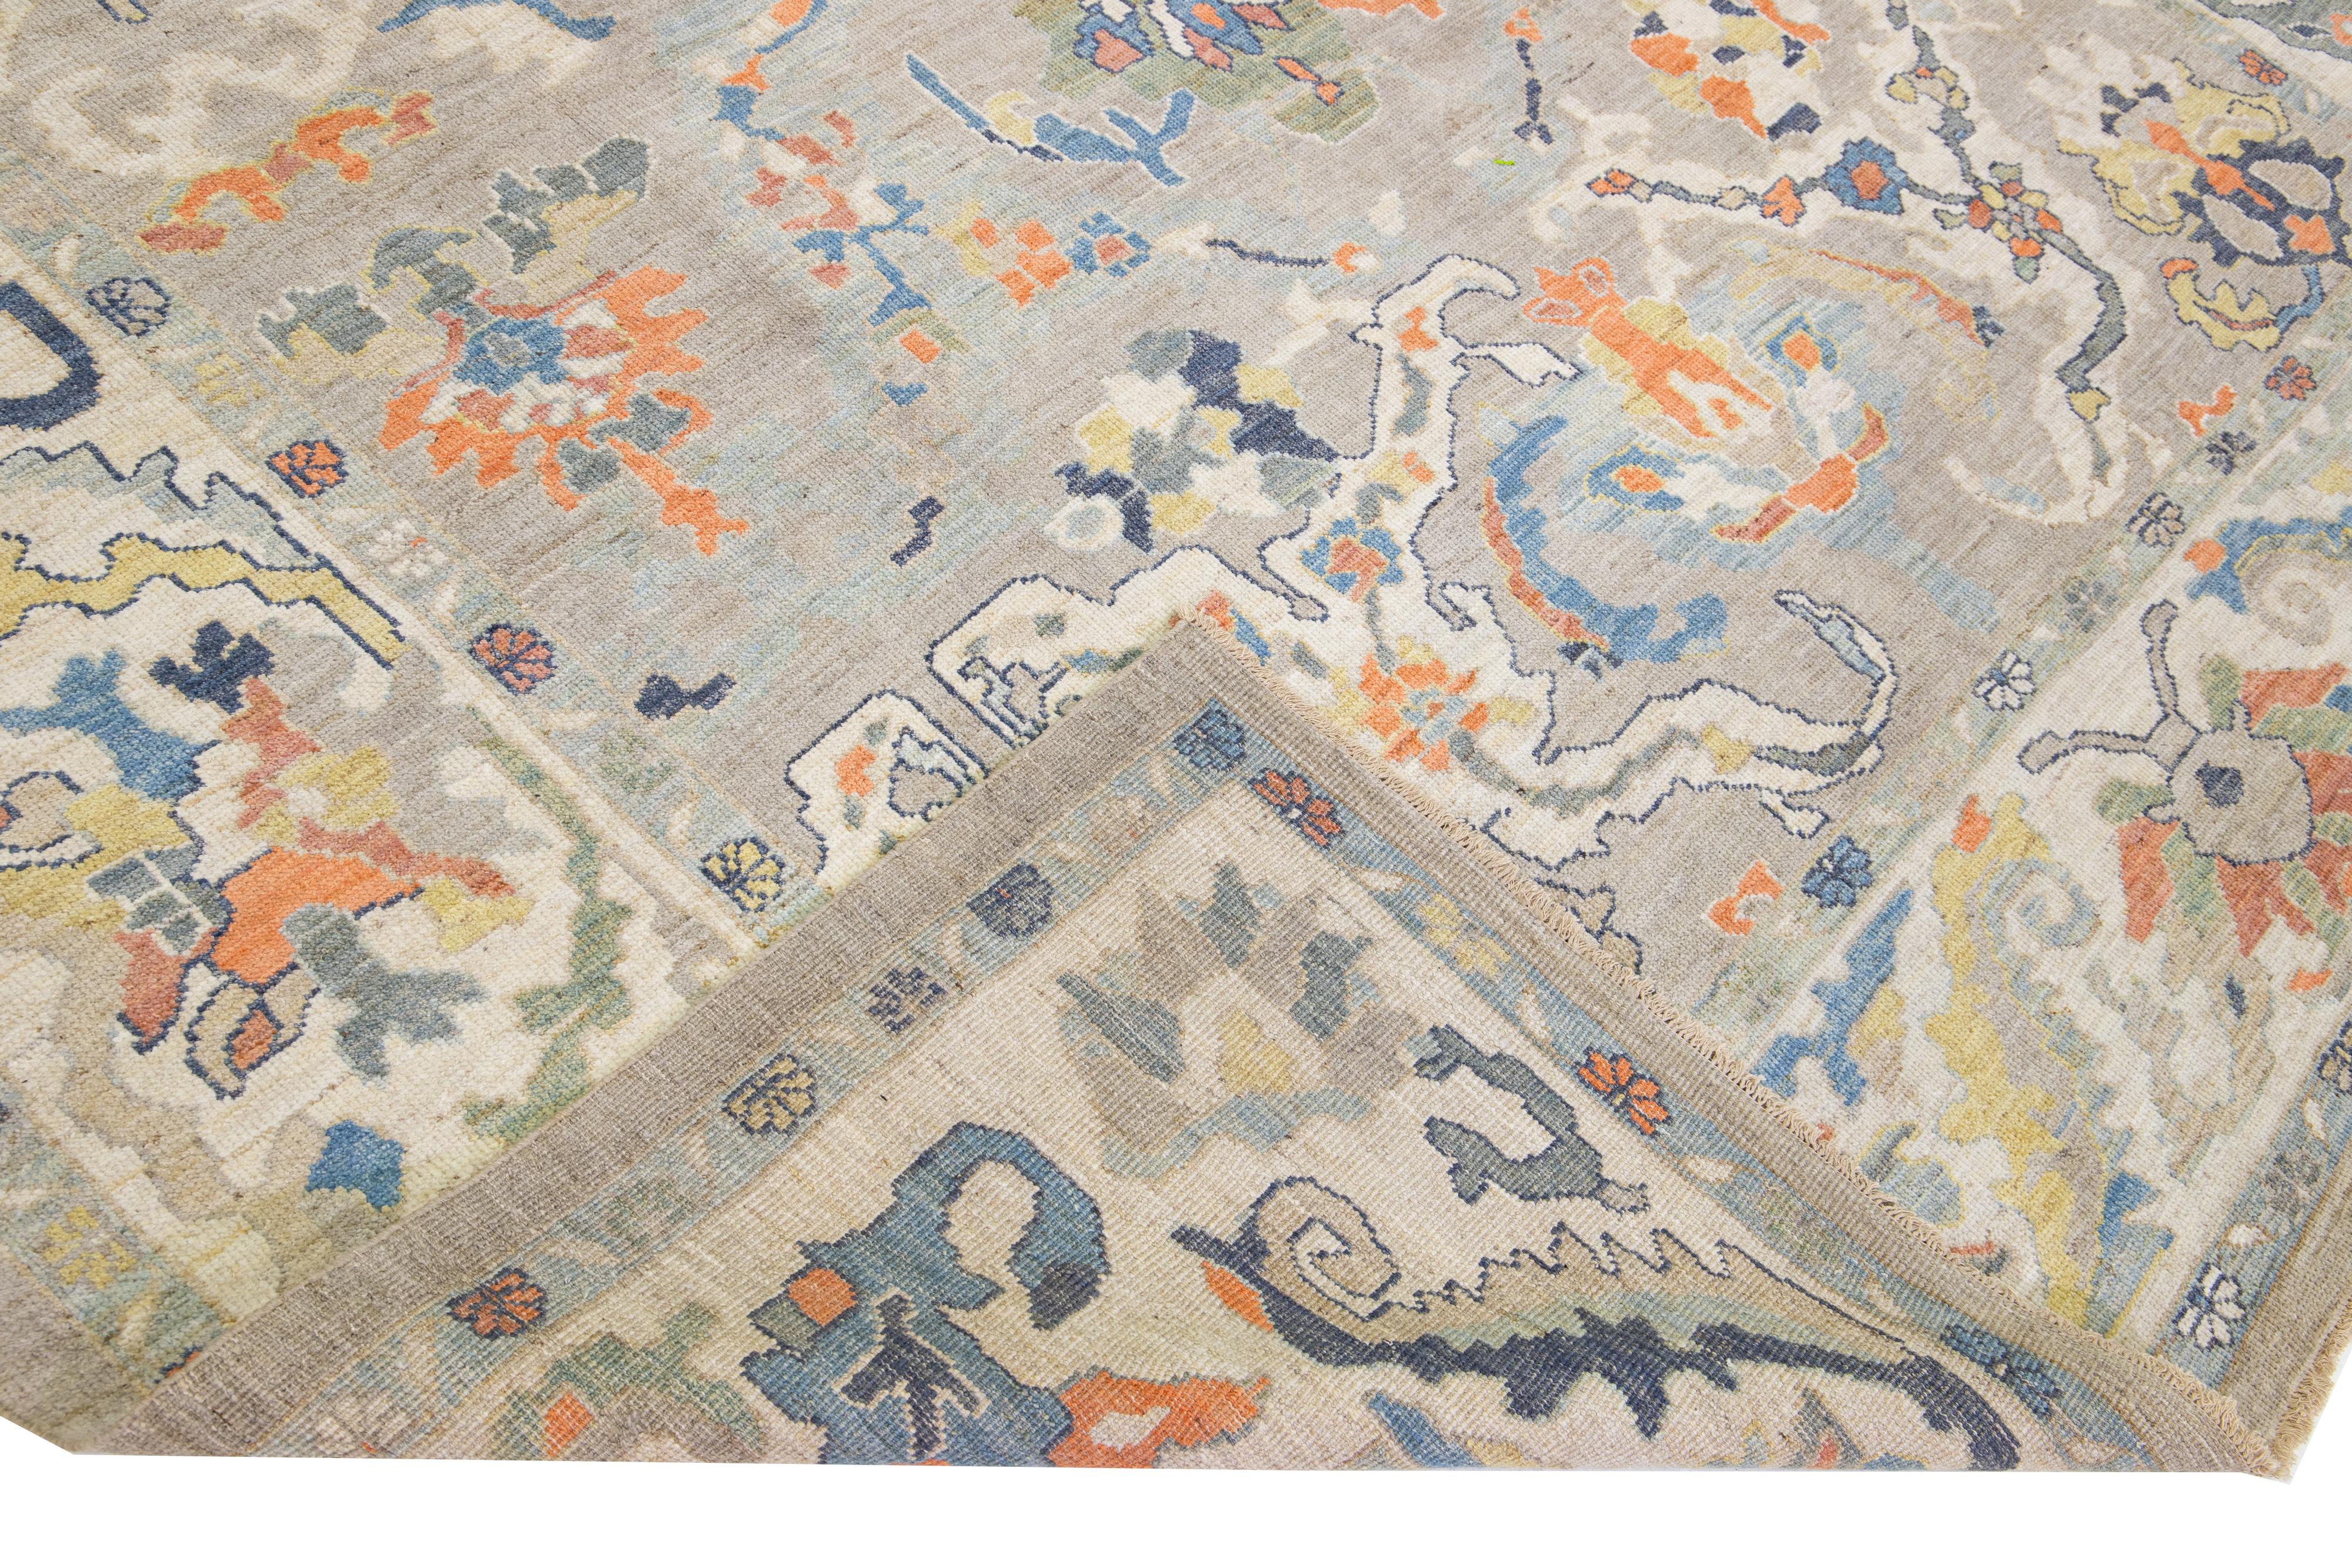 Beautiful modern Sultanabad hand-knotted wool rug with a gray color field. This rug has a beige frame with orange, yellow, and blue accents in a gorgeous all-over floral design.

This rug measures: 10'2